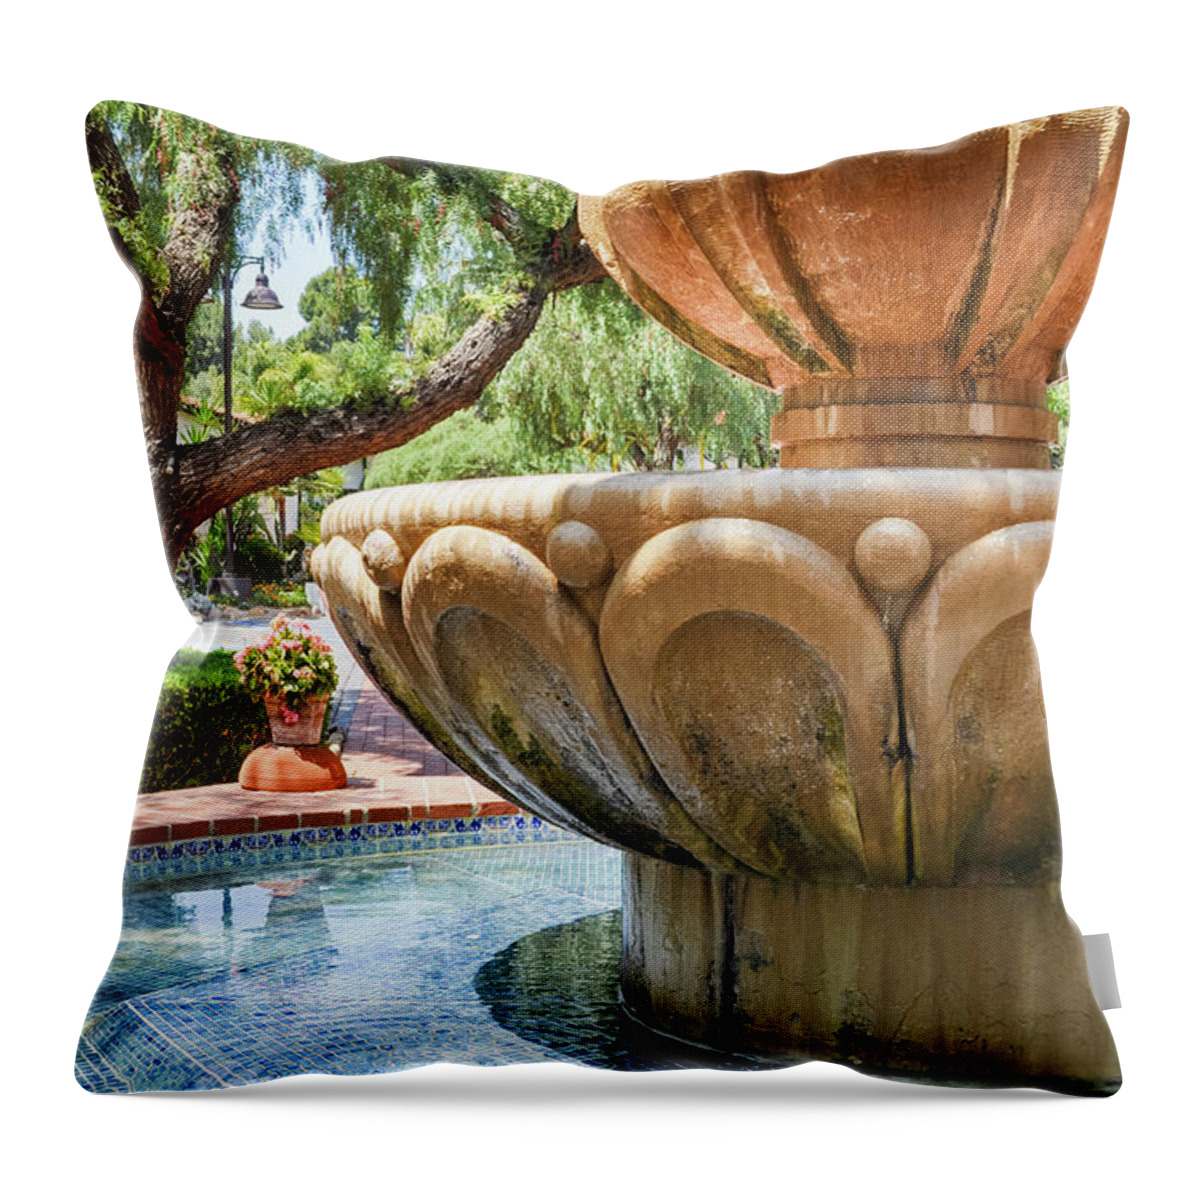 Mission San Diego De Alcala Throw Pillow featuring the photograph Mission San Diego Fountain Portrait by Kyle Hanson